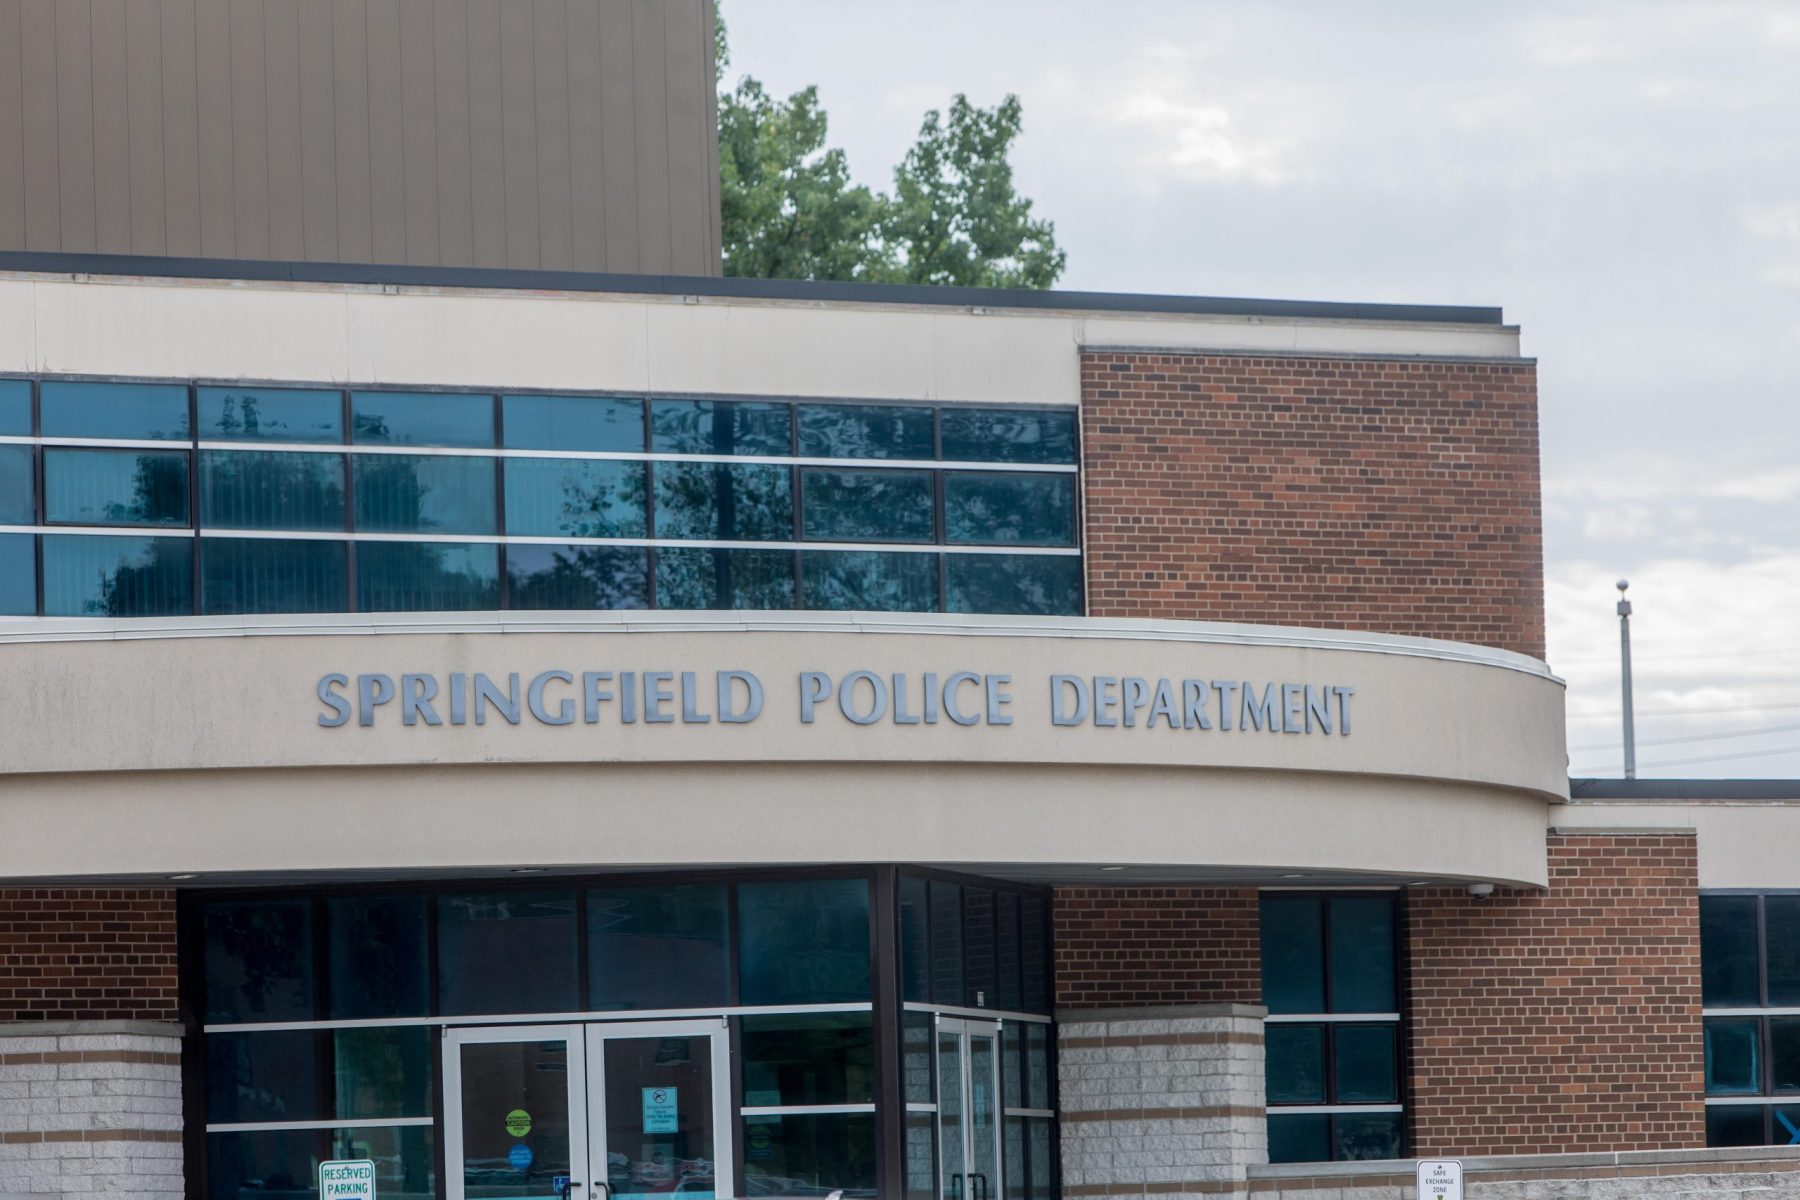 the front of the Springfield Police Department building.